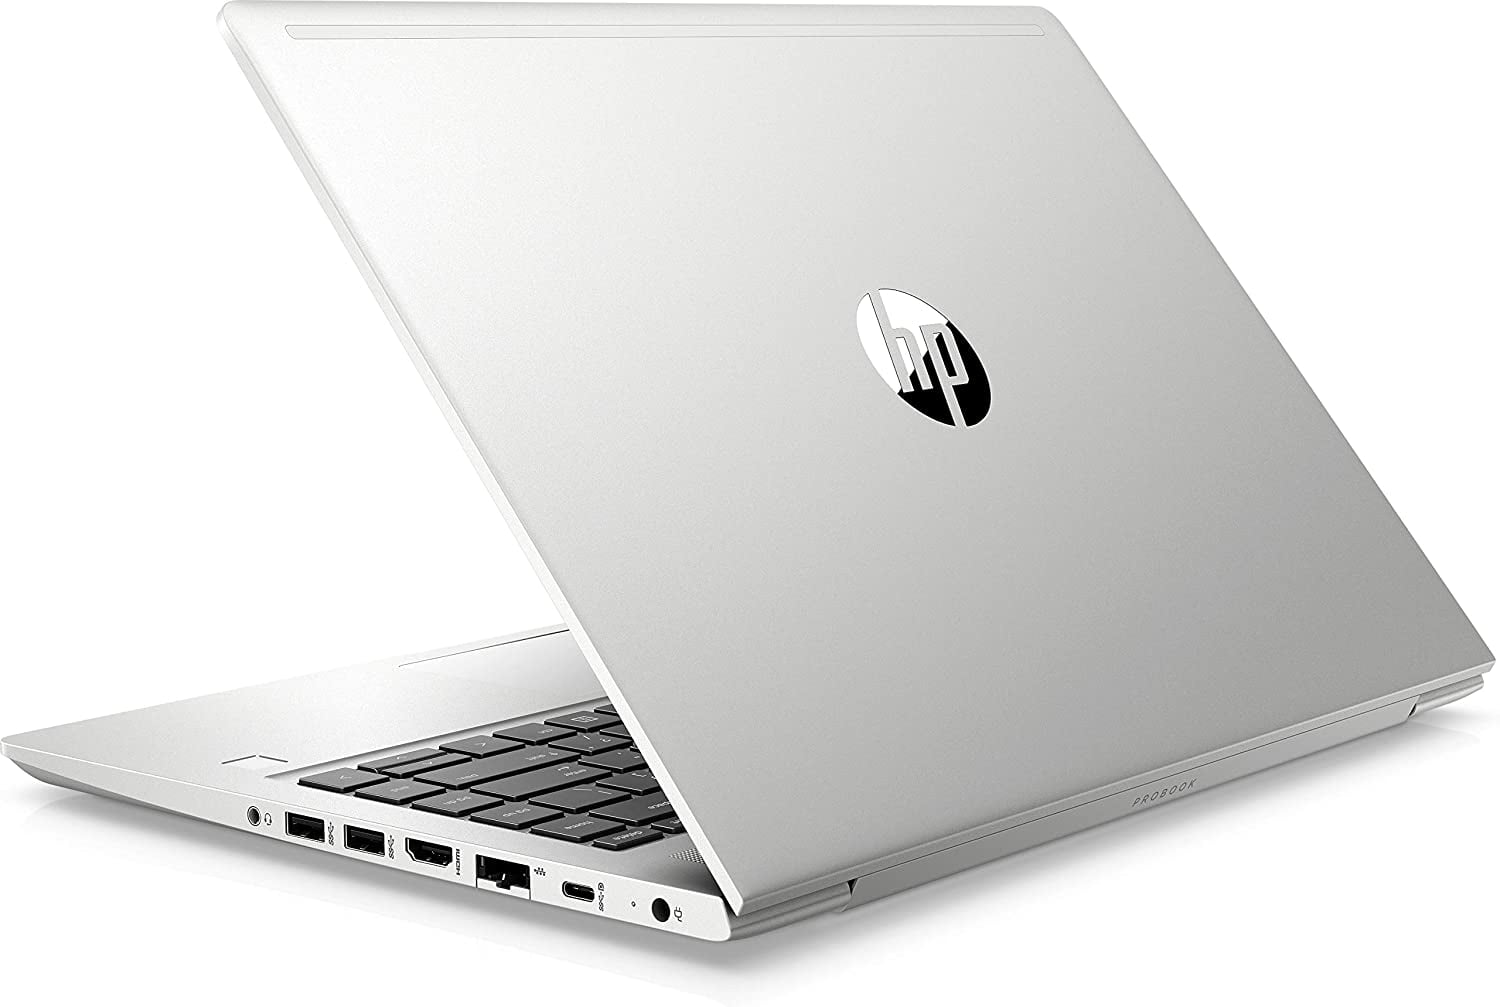 How Much Does A Refurbished Hp Probook 445 G7 AMD Ryzen 5 Cost In Kenya?